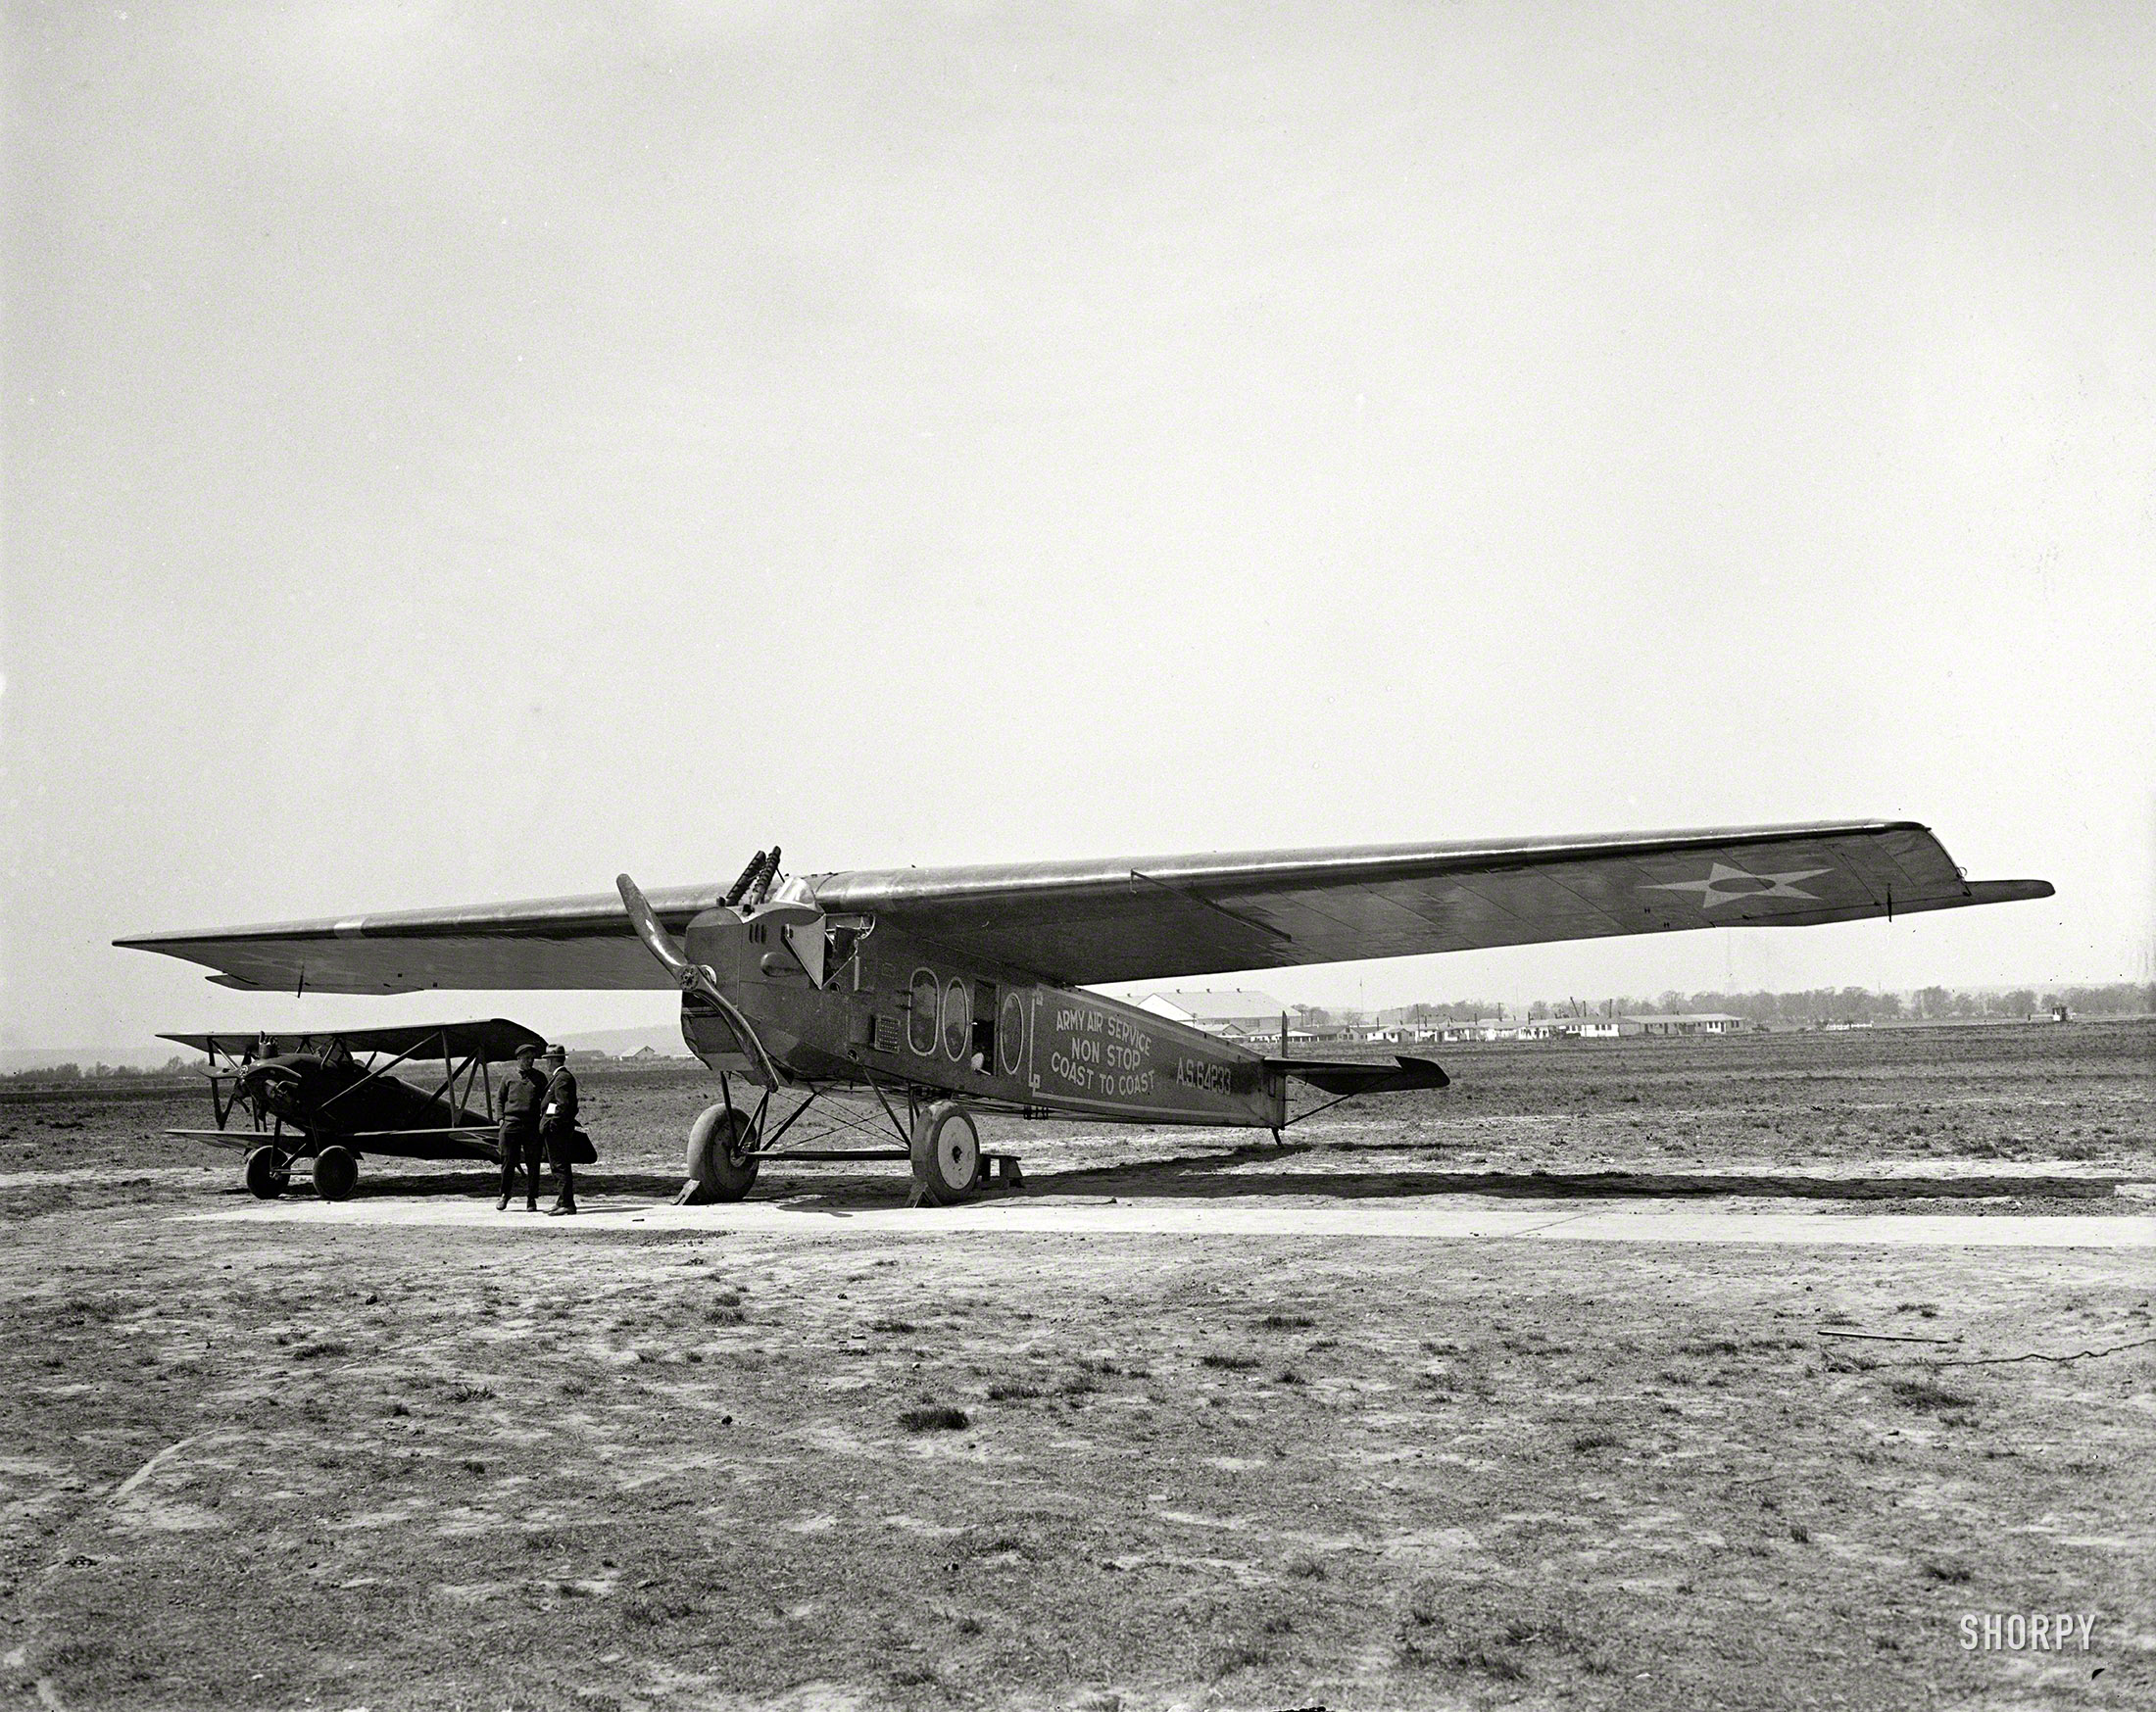 An unlabeled Harris & Ewing plate showing the U.S. Army Air Service Fokker T-2 that set a number of aviation records for unrefueled flight, including a nonstop transcontinental run from New York to California in just under 27 hours in May 1923, piloted by Lieutenants Oakley Kelly and John Macready. View full size.